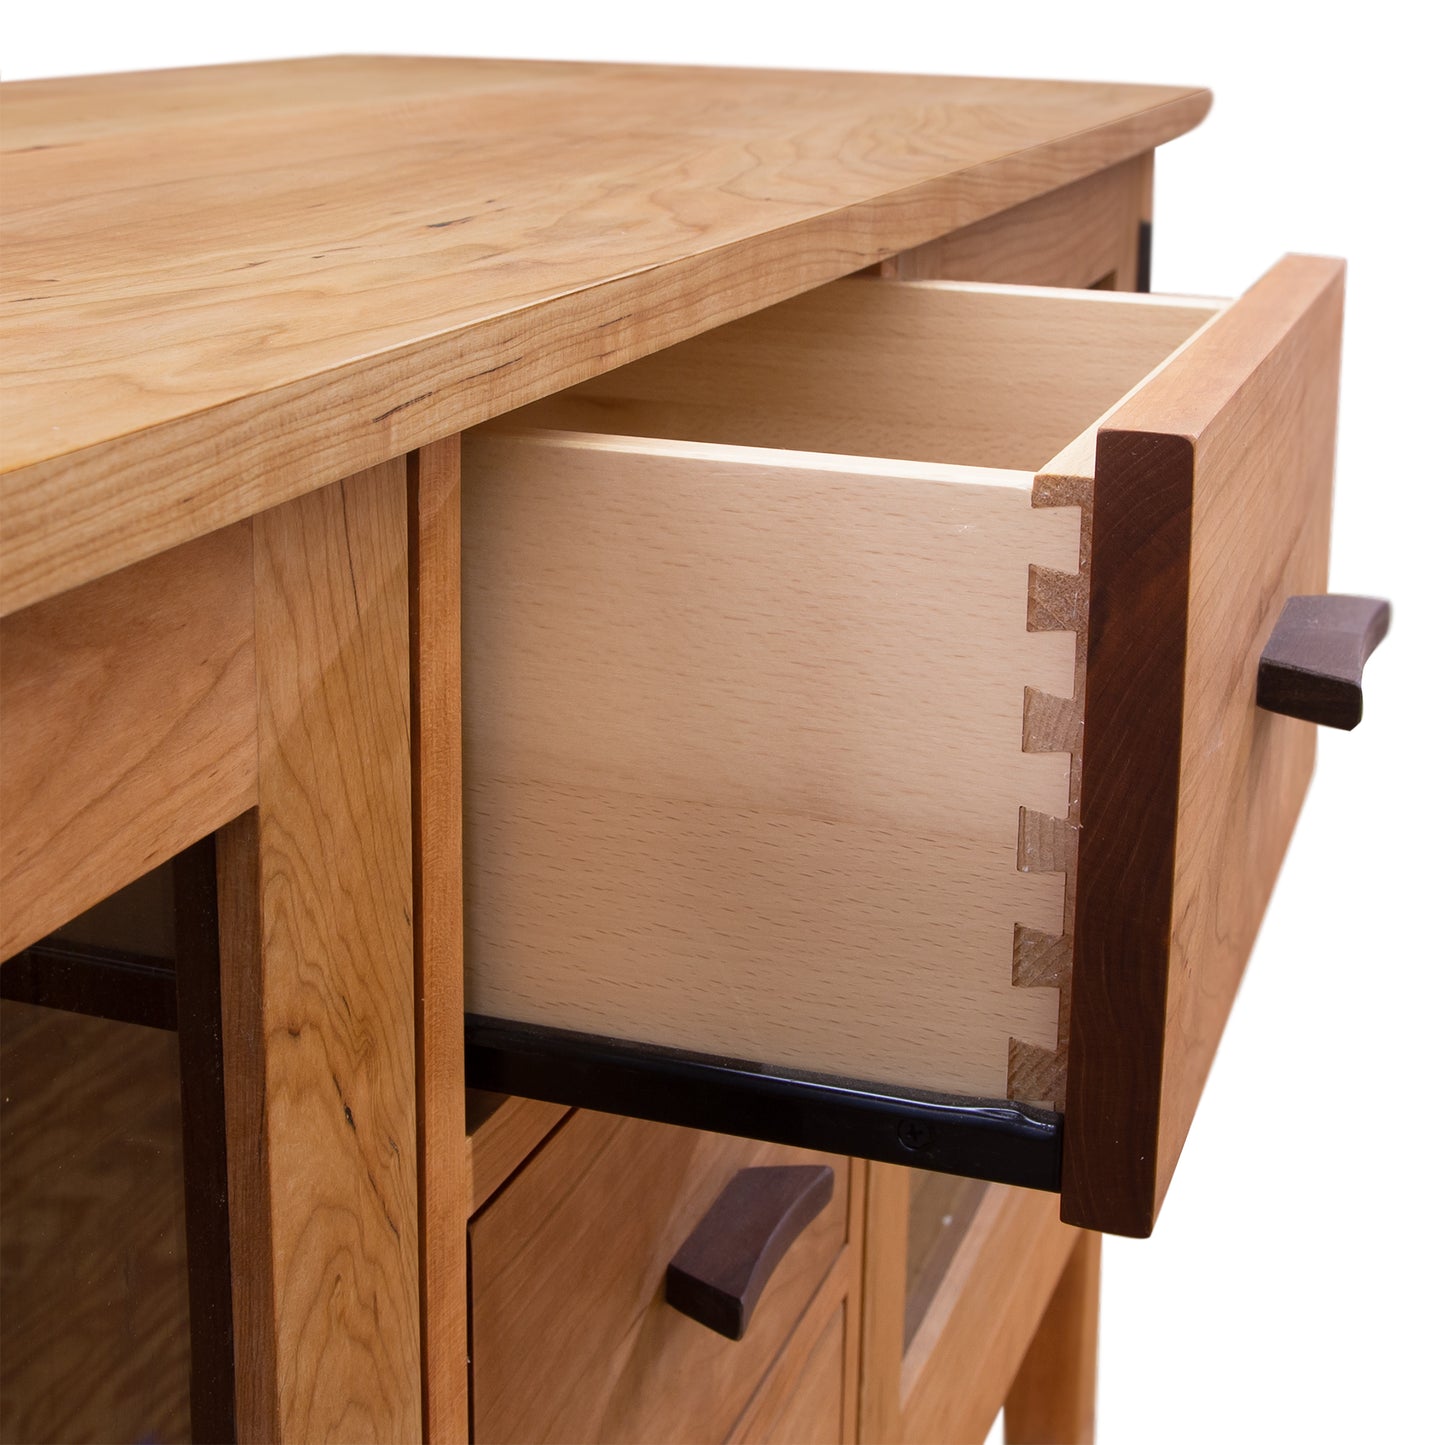 Eco-friendly Contemporary Craftsman 3-Drawer Media Console with an open drawer featuring dovetail joinery by Vermont Furniture Designs.